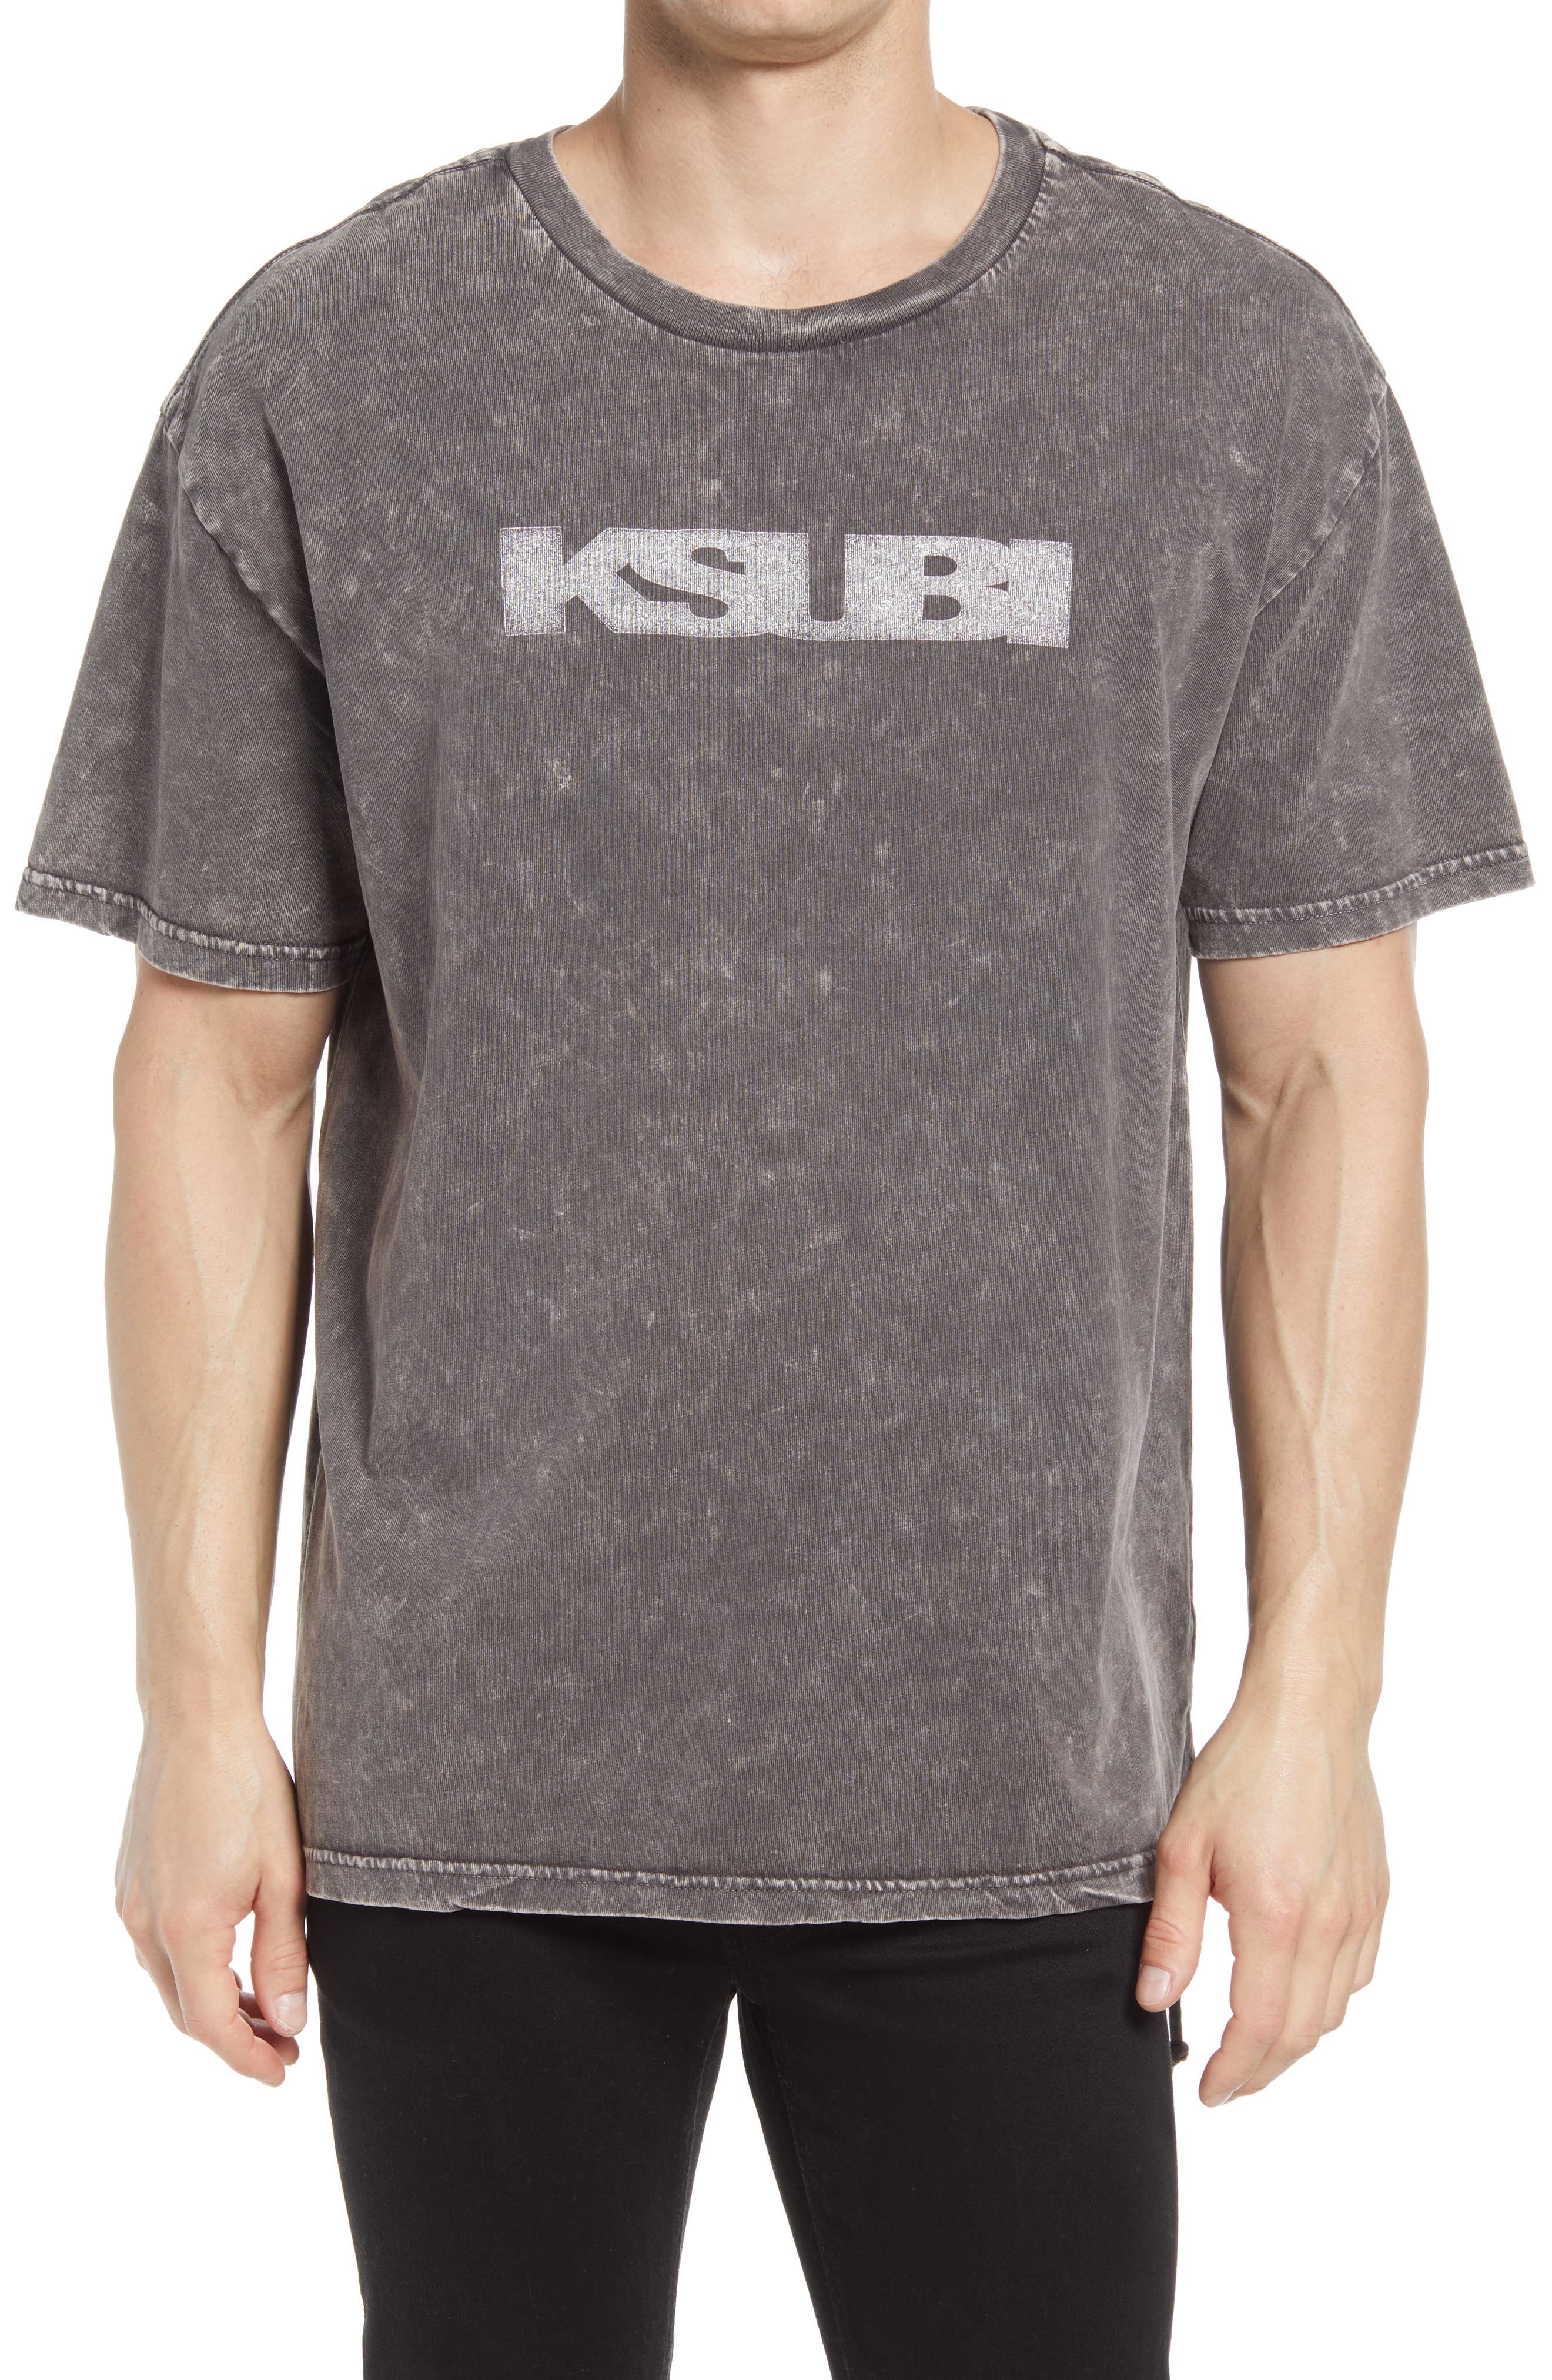 Ksubi Sign of the Times Men's Biggie Graphic Tee in Grey at Nordstrom, Size Xx-Large